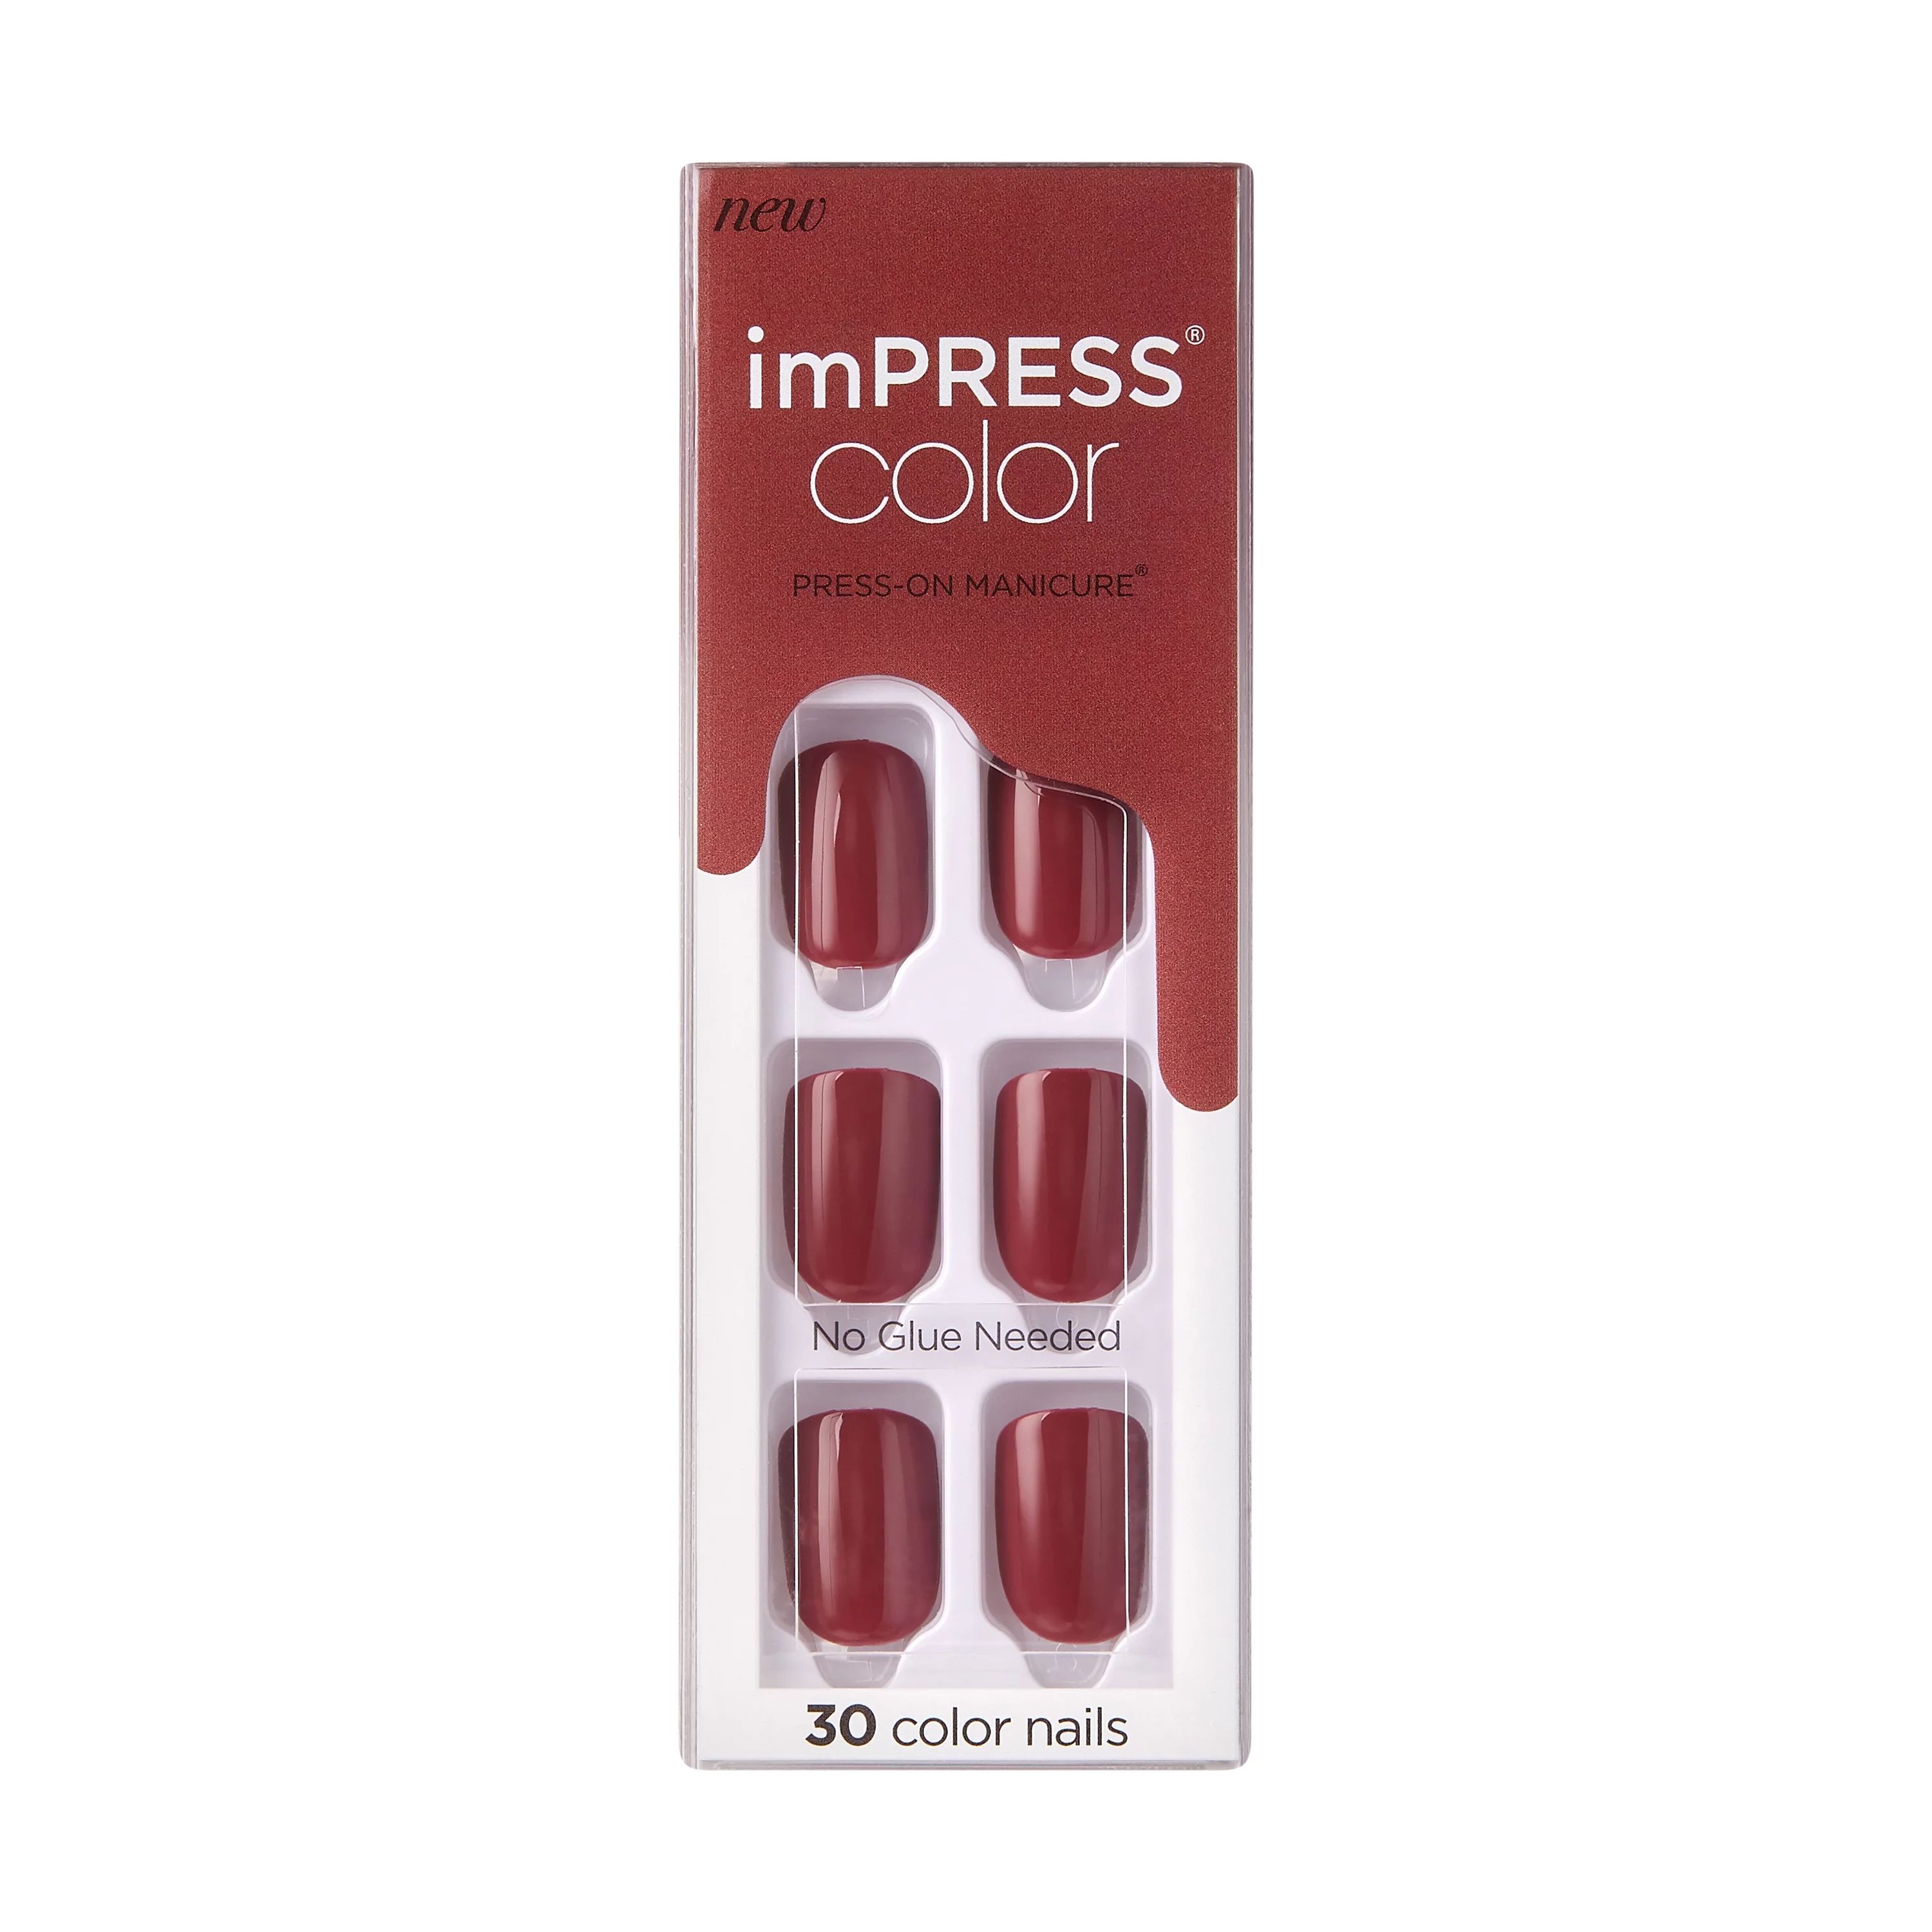 KISS imPRESS Color Press-on Manicure, ‘Espress(y)ourself’, 30 Count | Walmart (US)